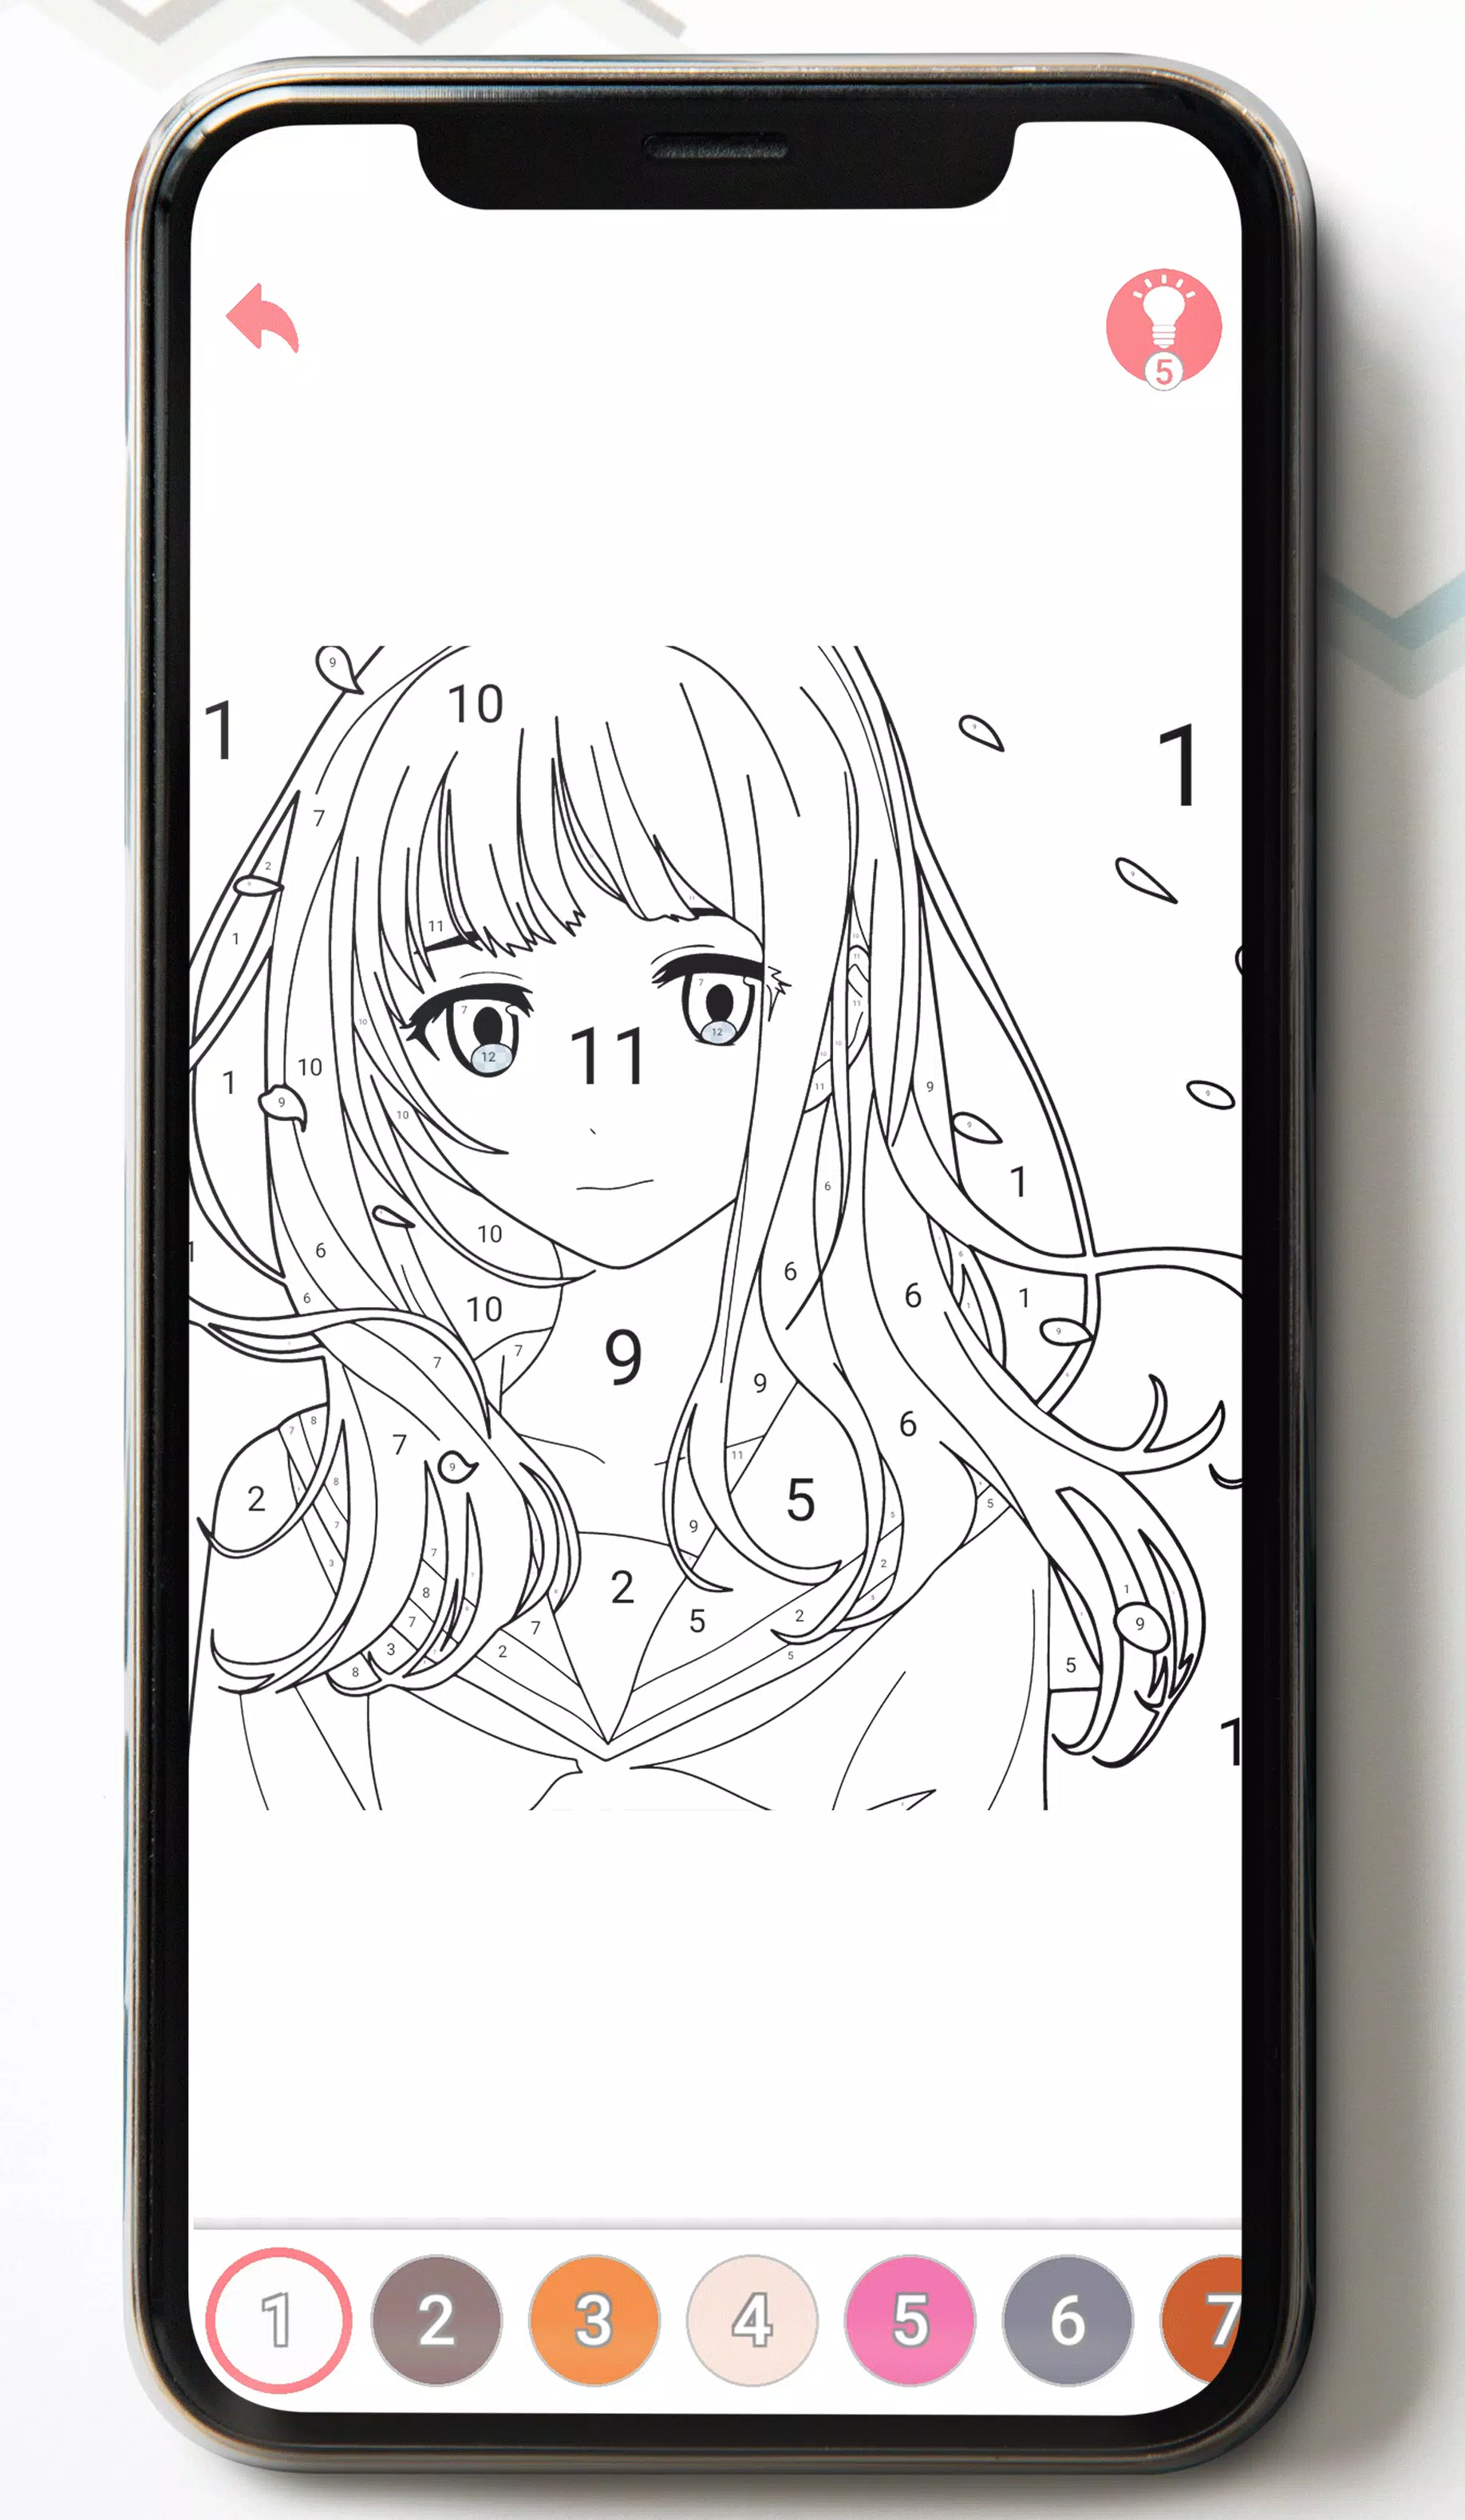 Anime - Paint by Numbers Apk Download for Android- Latest version 3.7-  zonek.design.paintbynumbers